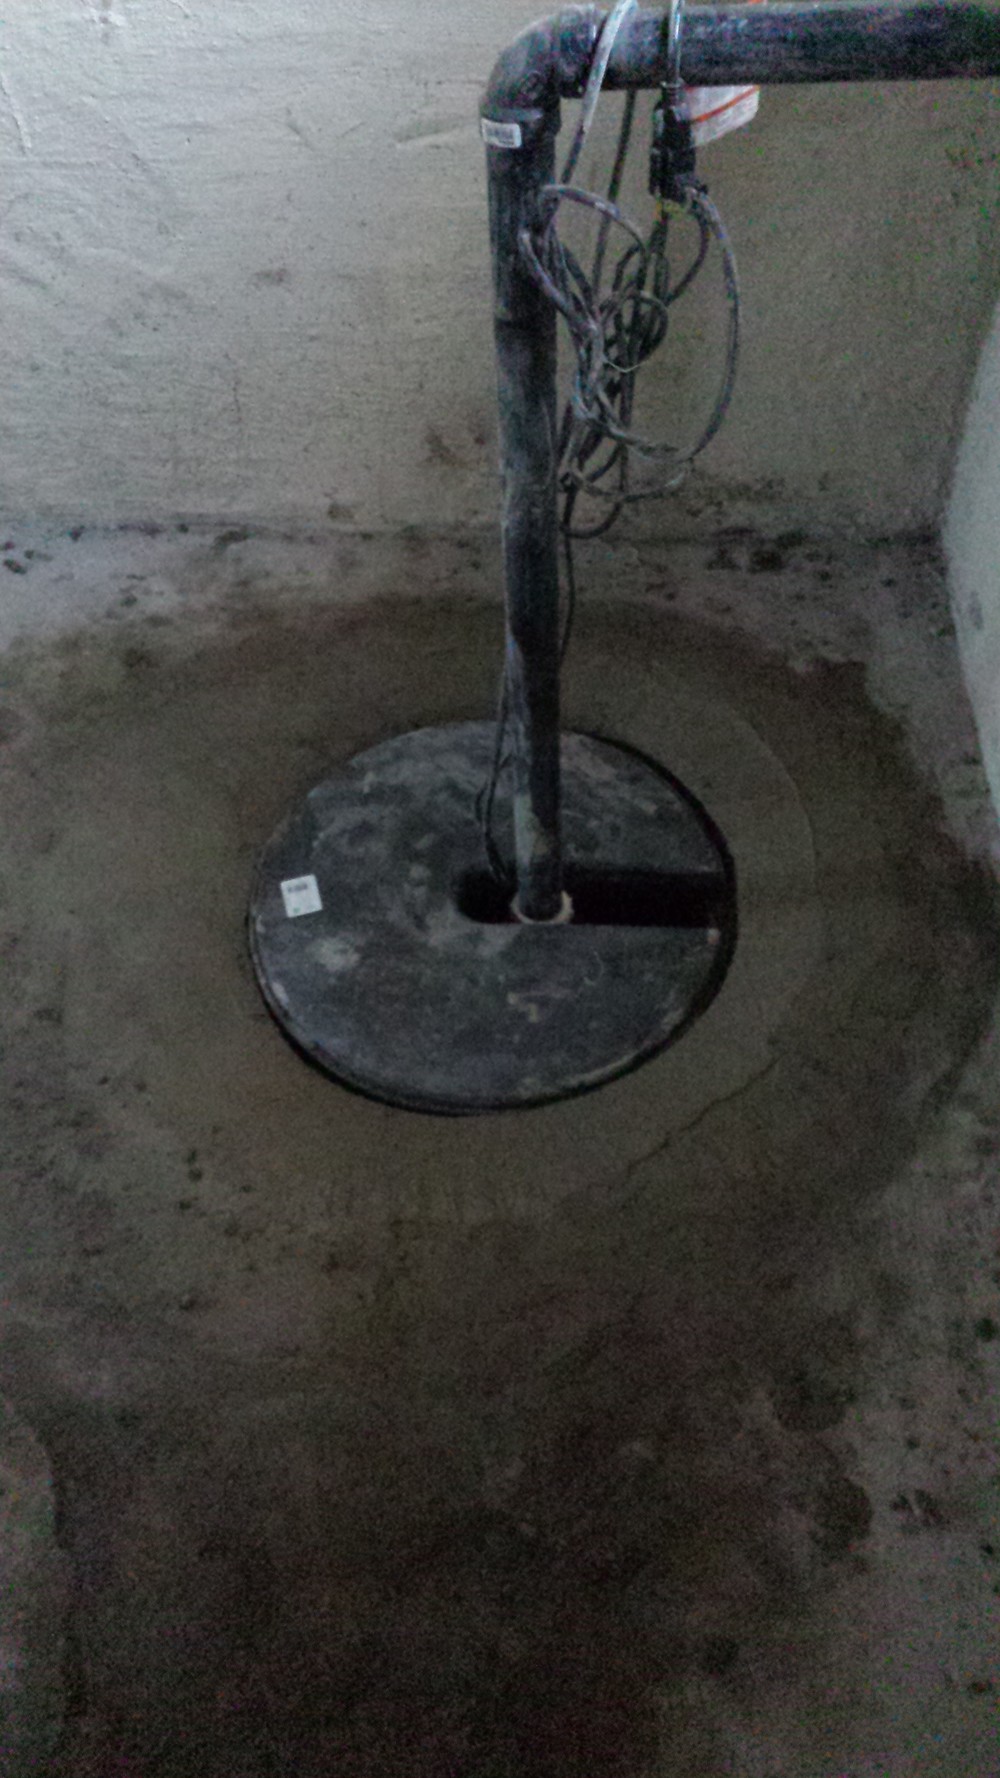 How do you use a pump to remove water from a basement?